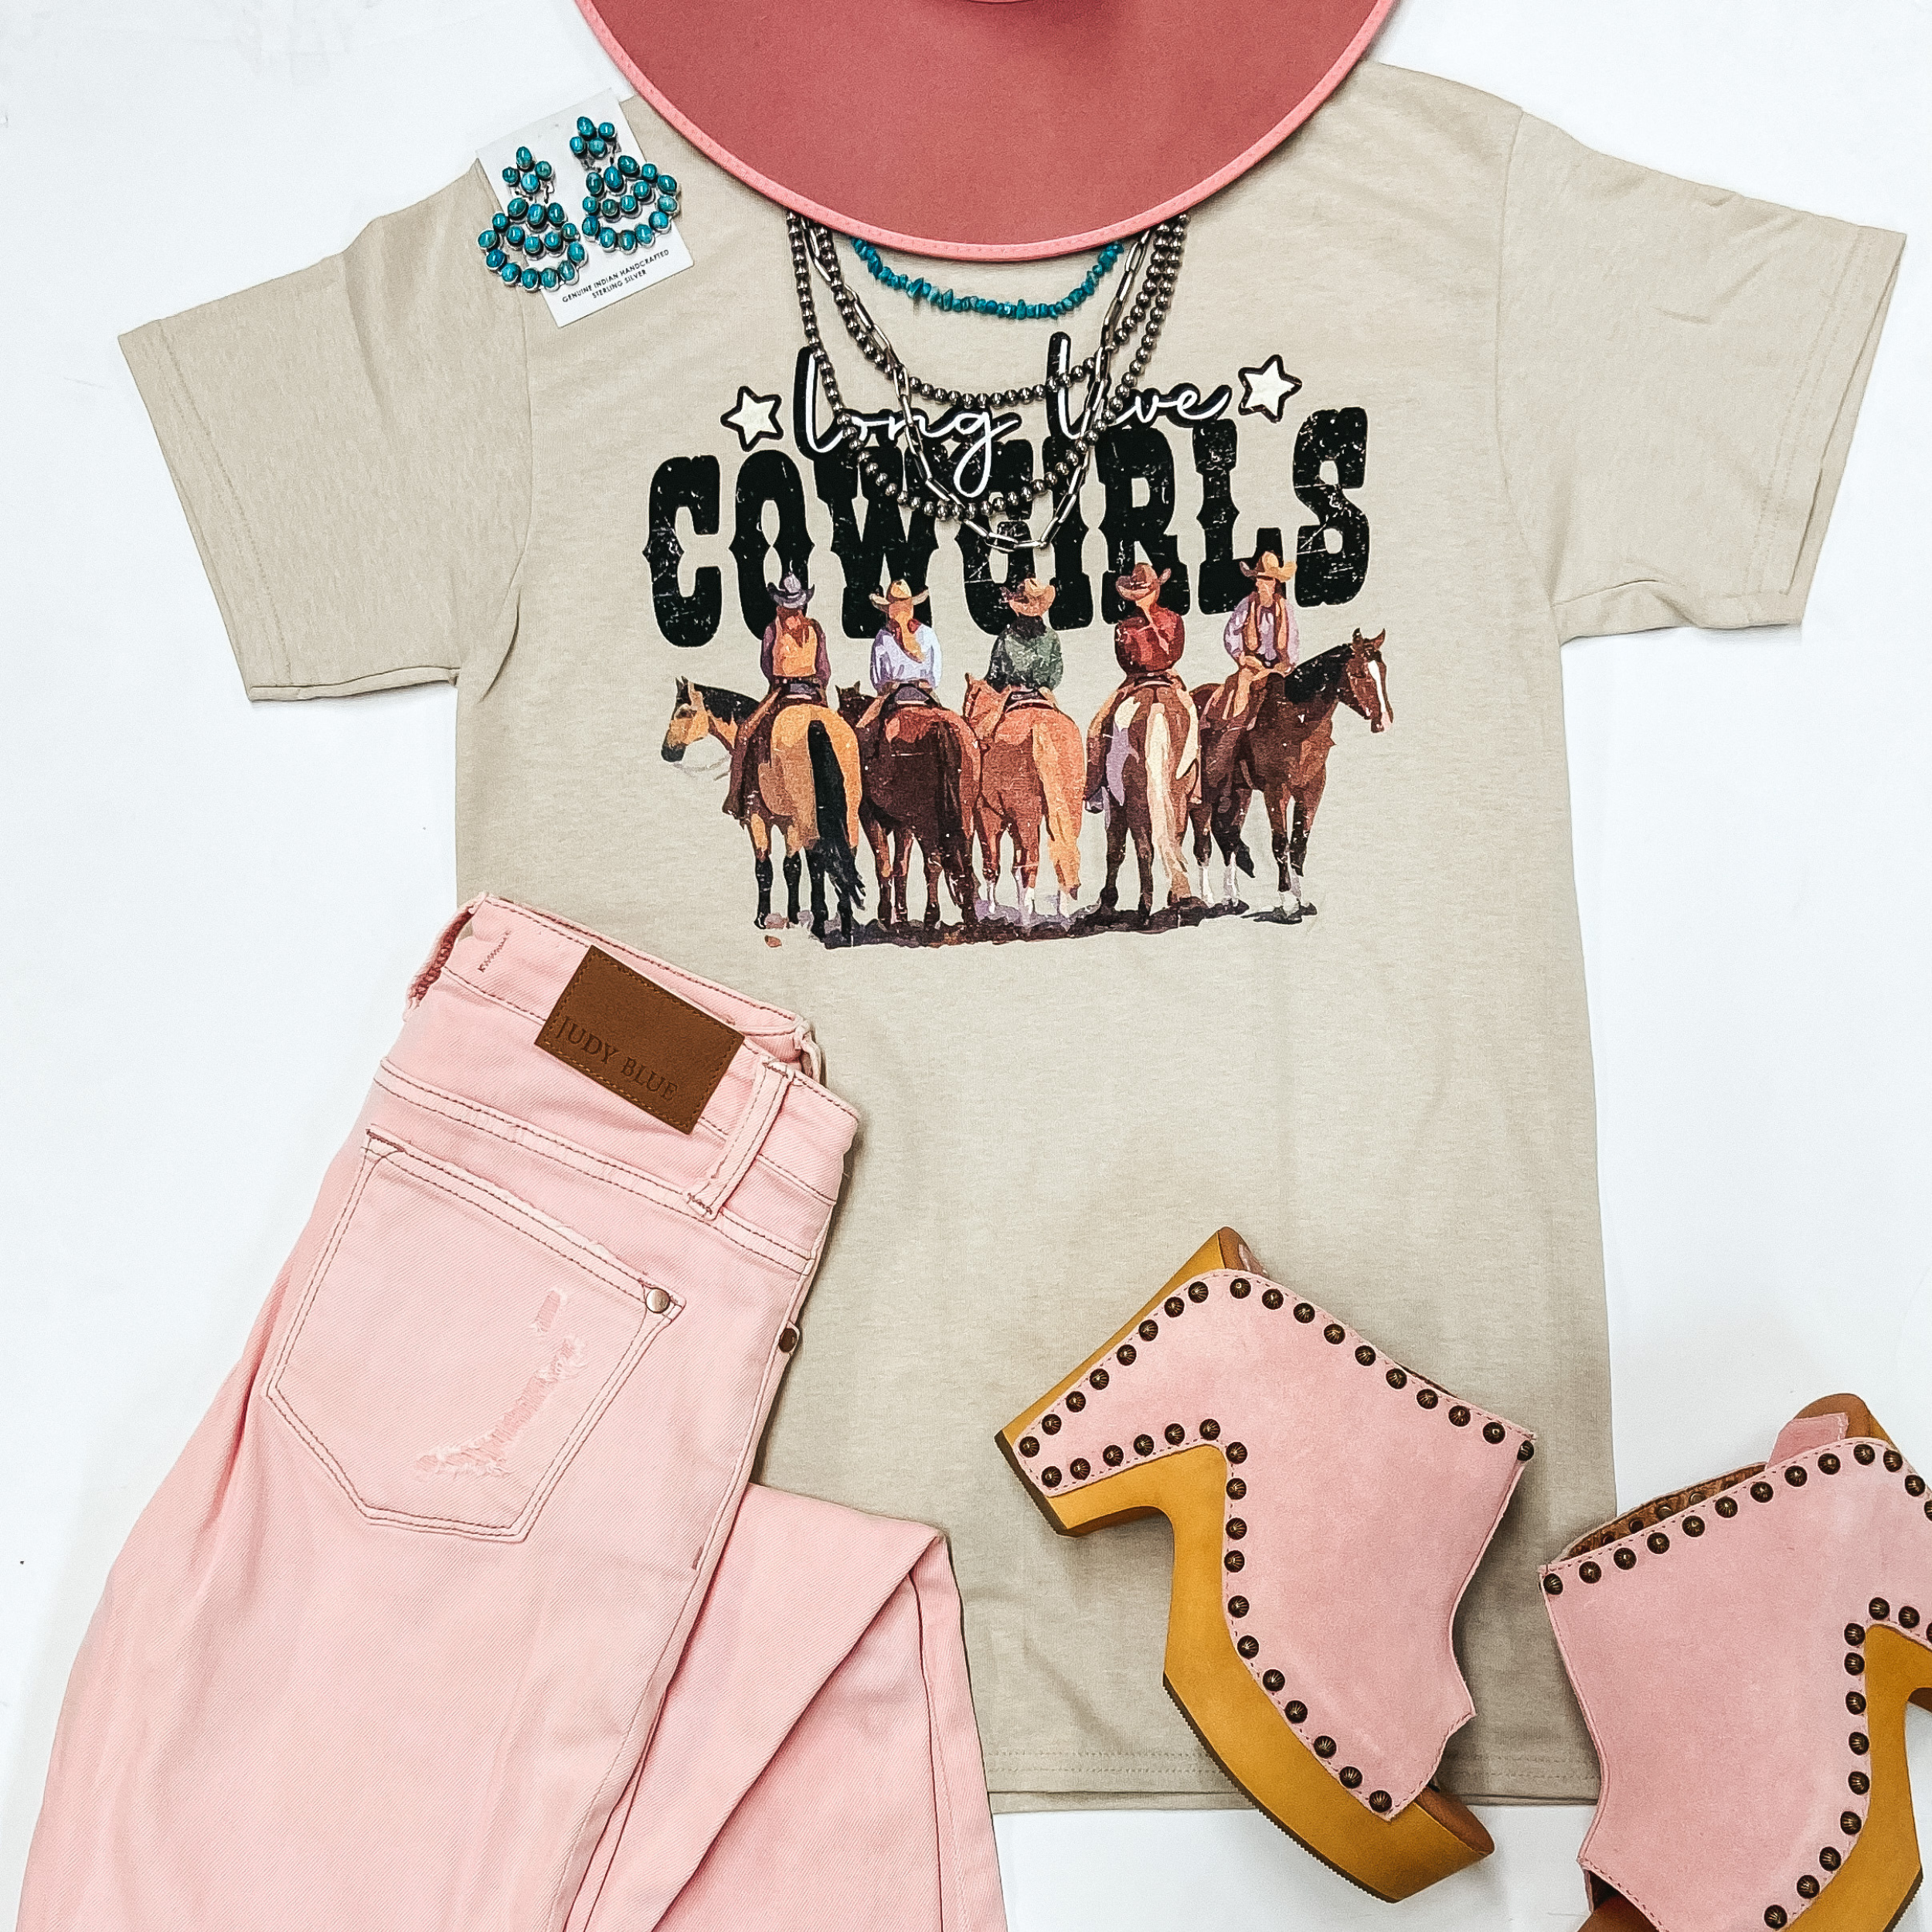 A beige graphic tee with cowgirls on horses that says "Long Live Cowgirls." This tee is pictured on a white background with genuine Navajo Jewelry and pink jeans, pink wedges, and a pink hat.